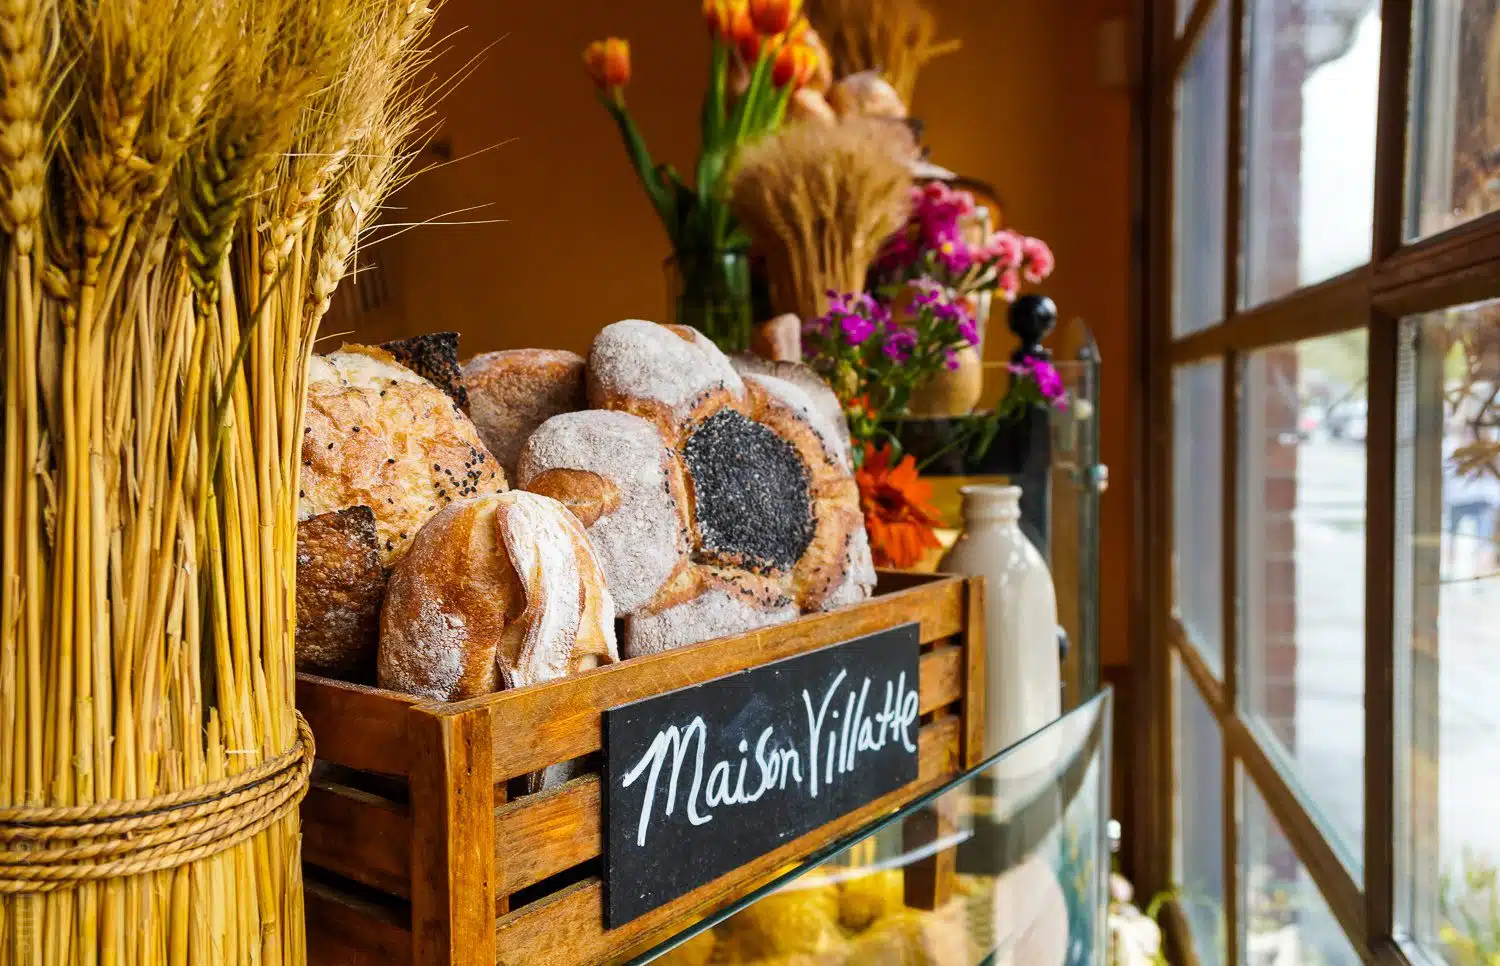 Maison Villatte French Bakery in Falmouth